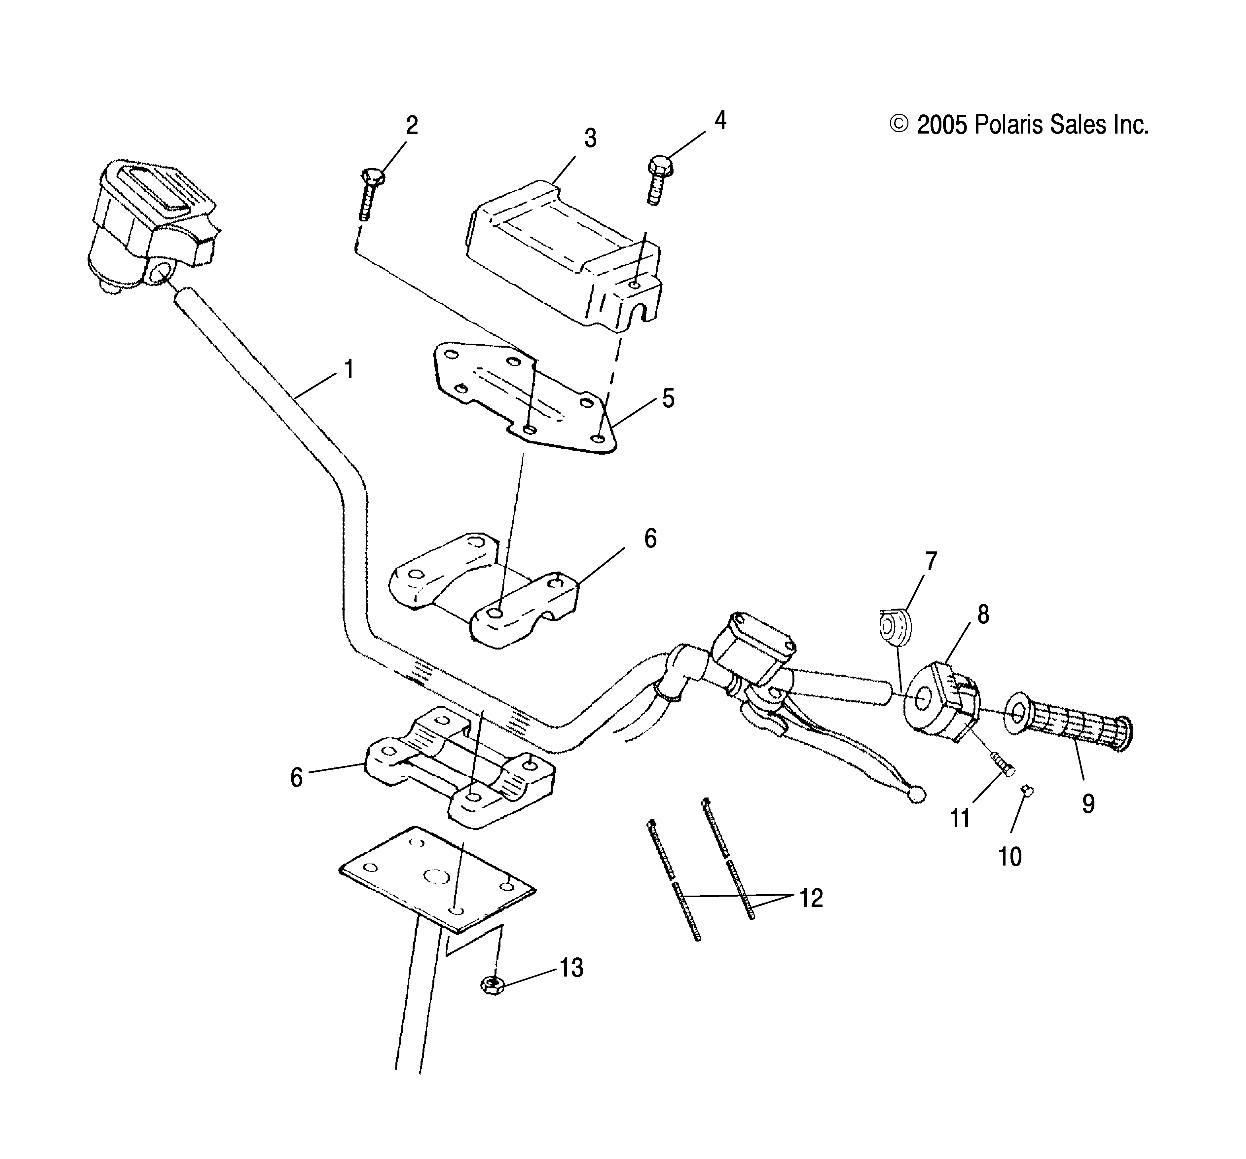 Part Number : 4011386 SWITCH-HANDLEBAR ON/OFF